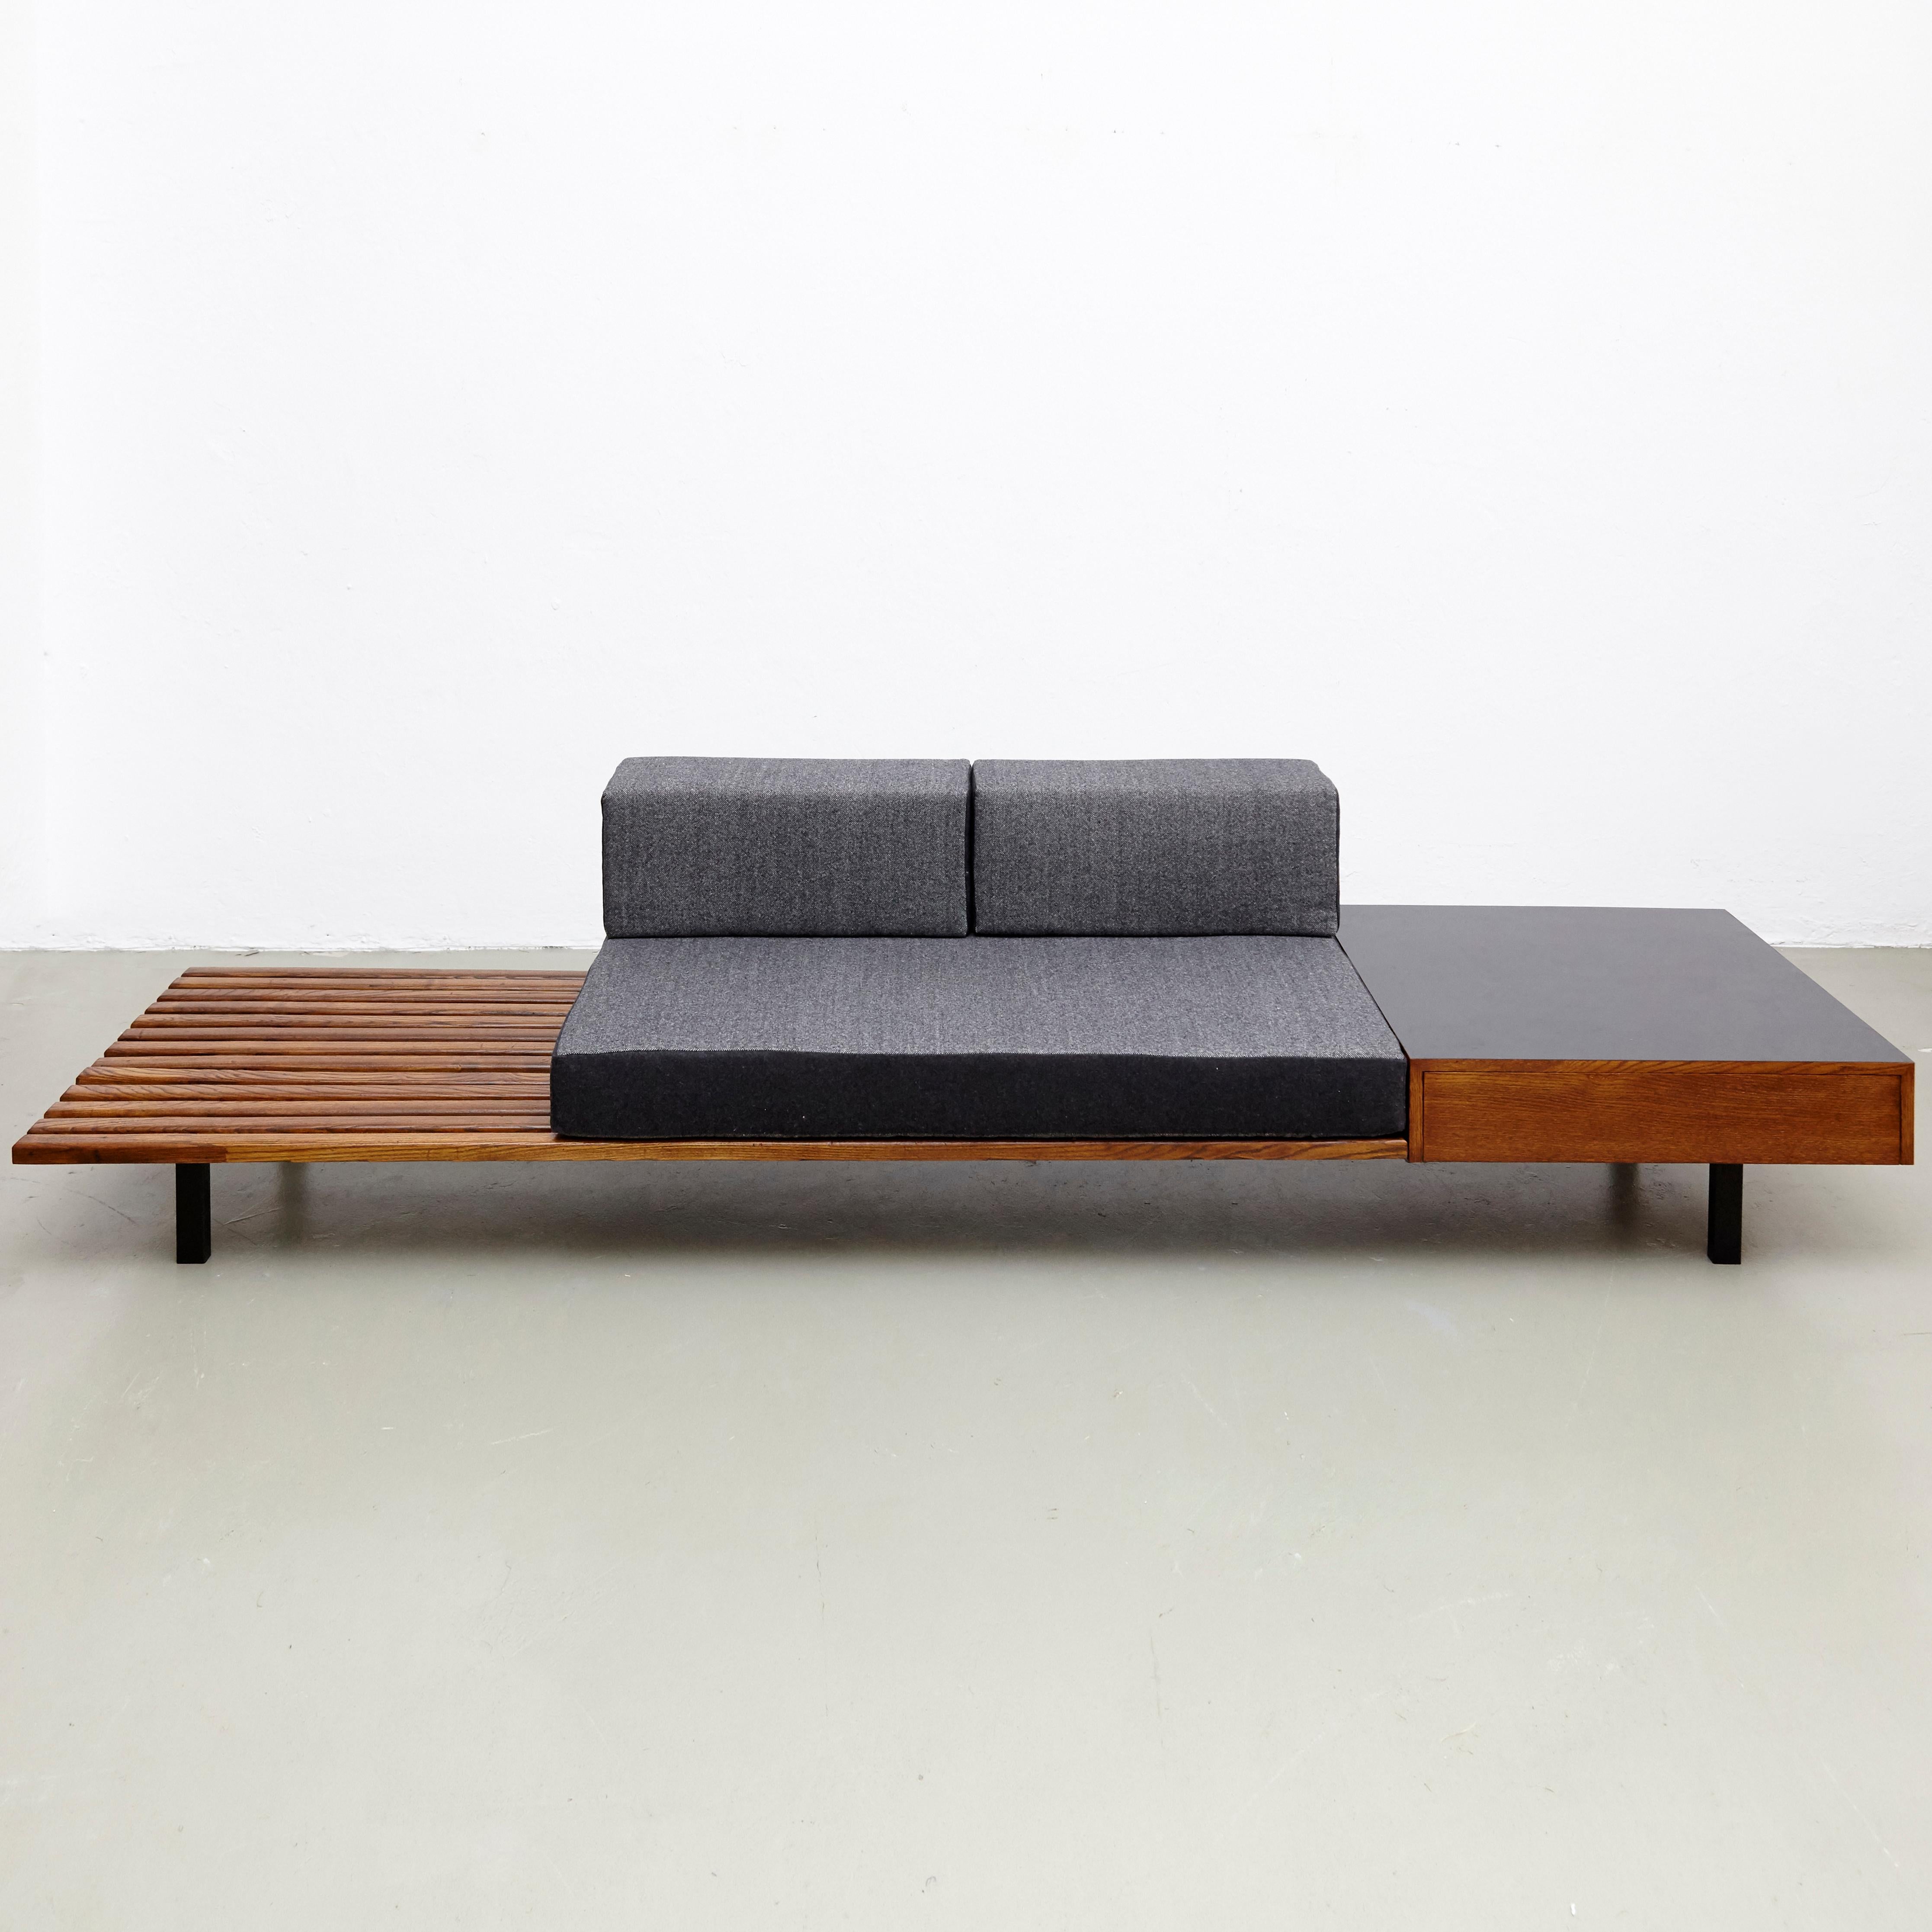 Bench with side table and drawer, from Cite Cansado, Mauritania, designed by Charlotte Perriand.
Mahogany wood, oak, plastic laminated covered wood, lacquered metal and fabric.

In good original condition, with minor wear consistent with age and